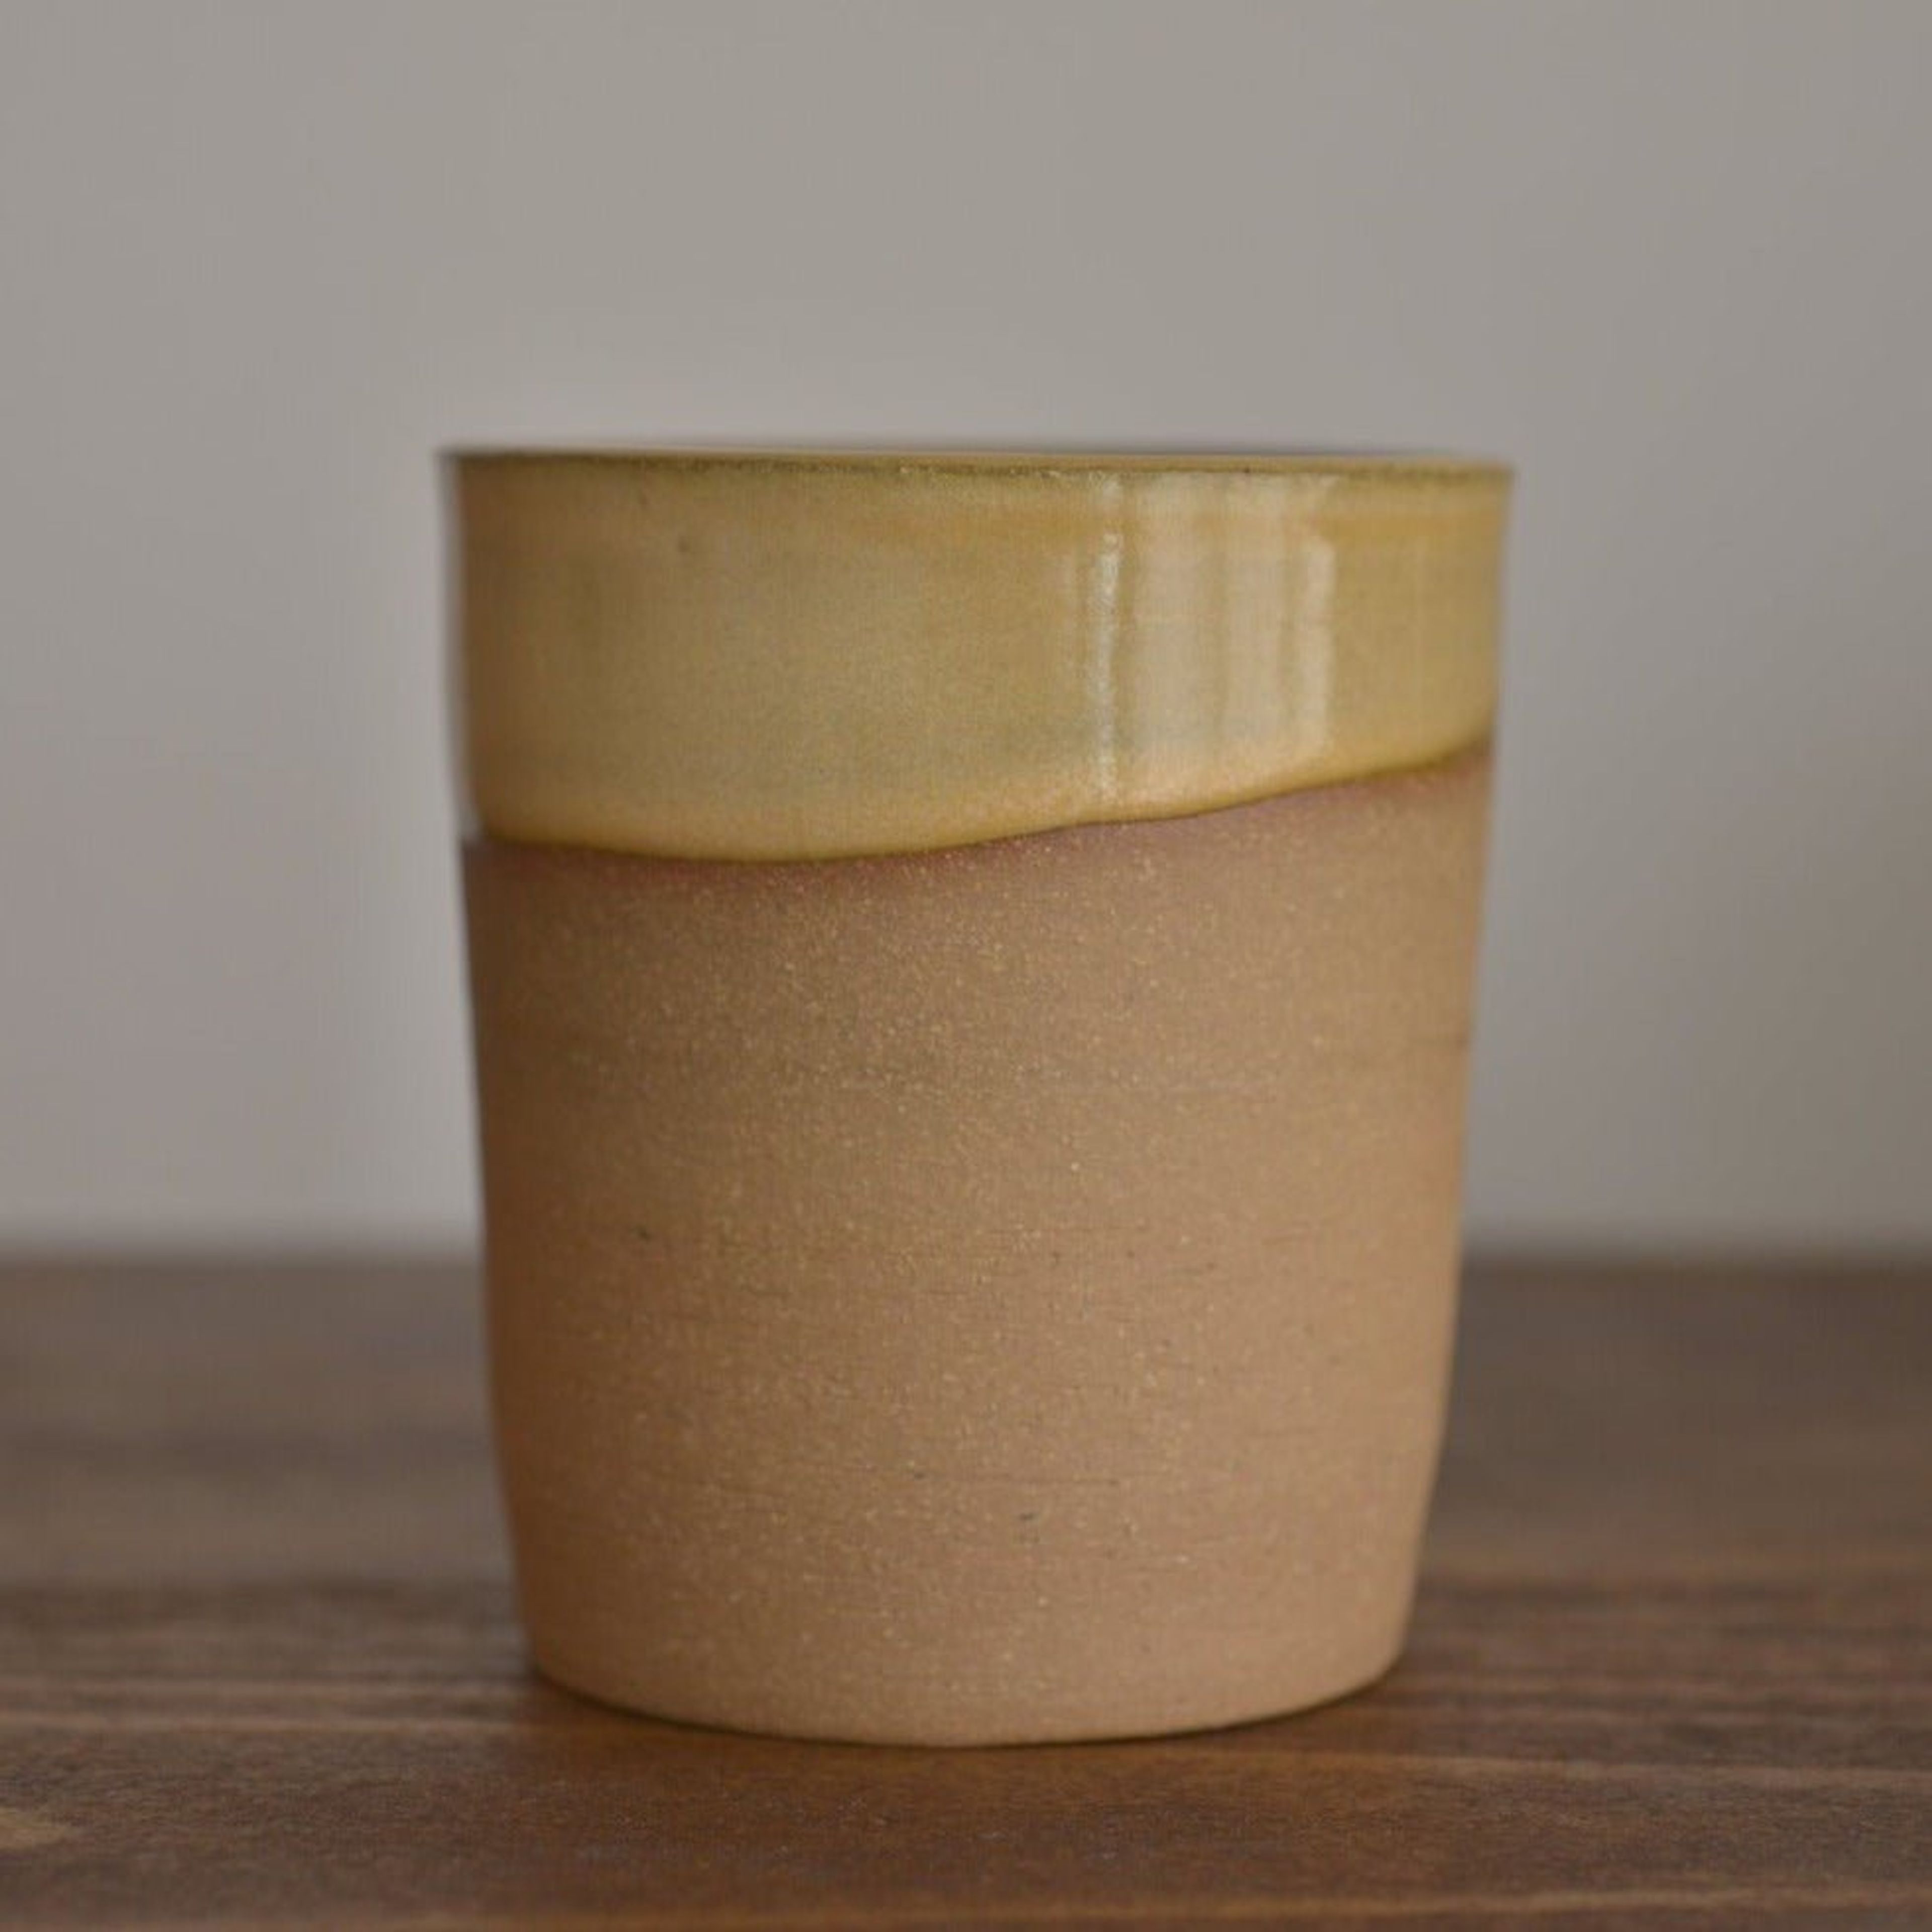 Julie Kittredge x Slow Made: Limited Edition Candle